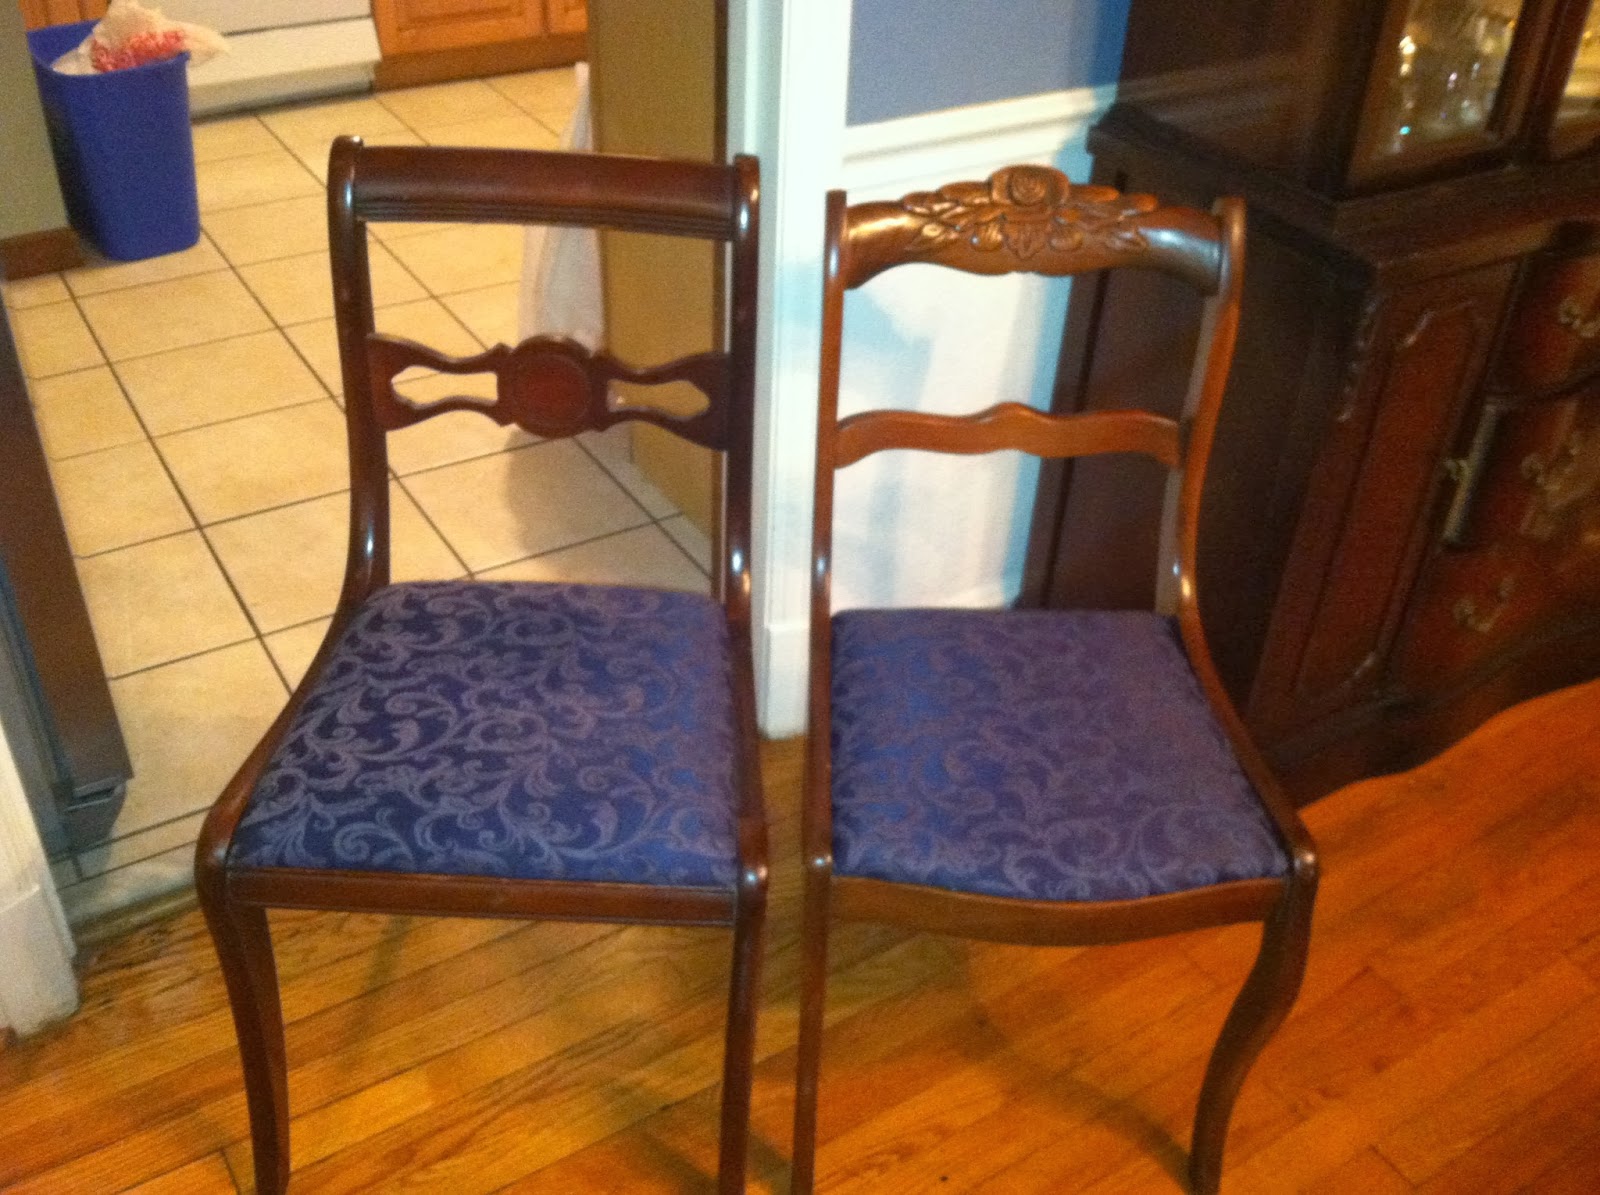 Dining Room Chairs Site Craigslist.Org